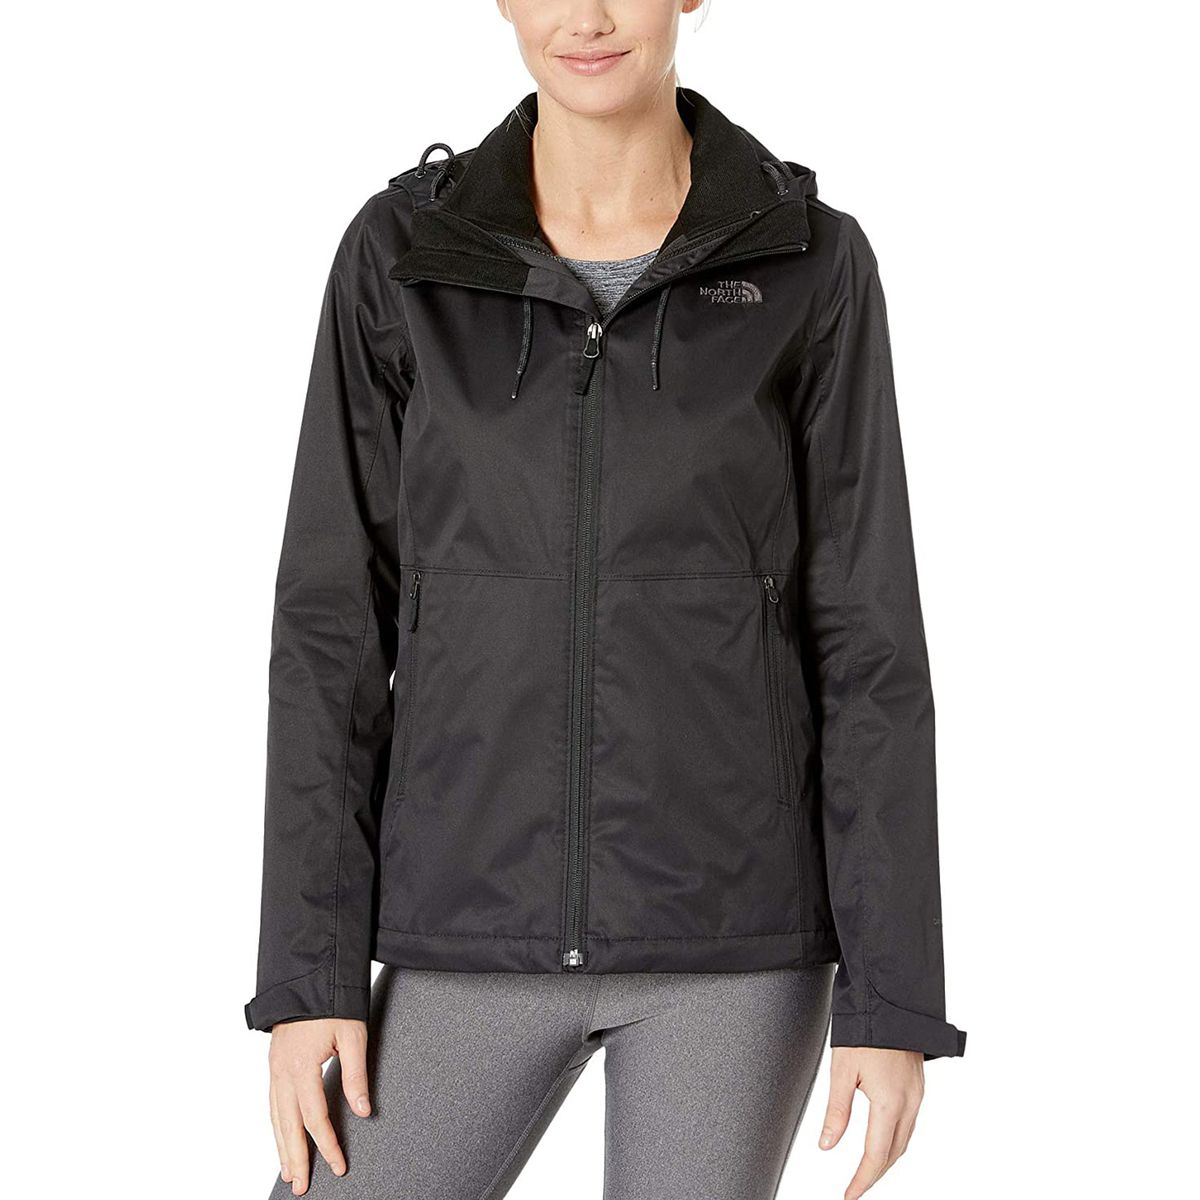 Inlux Insulated Jacket